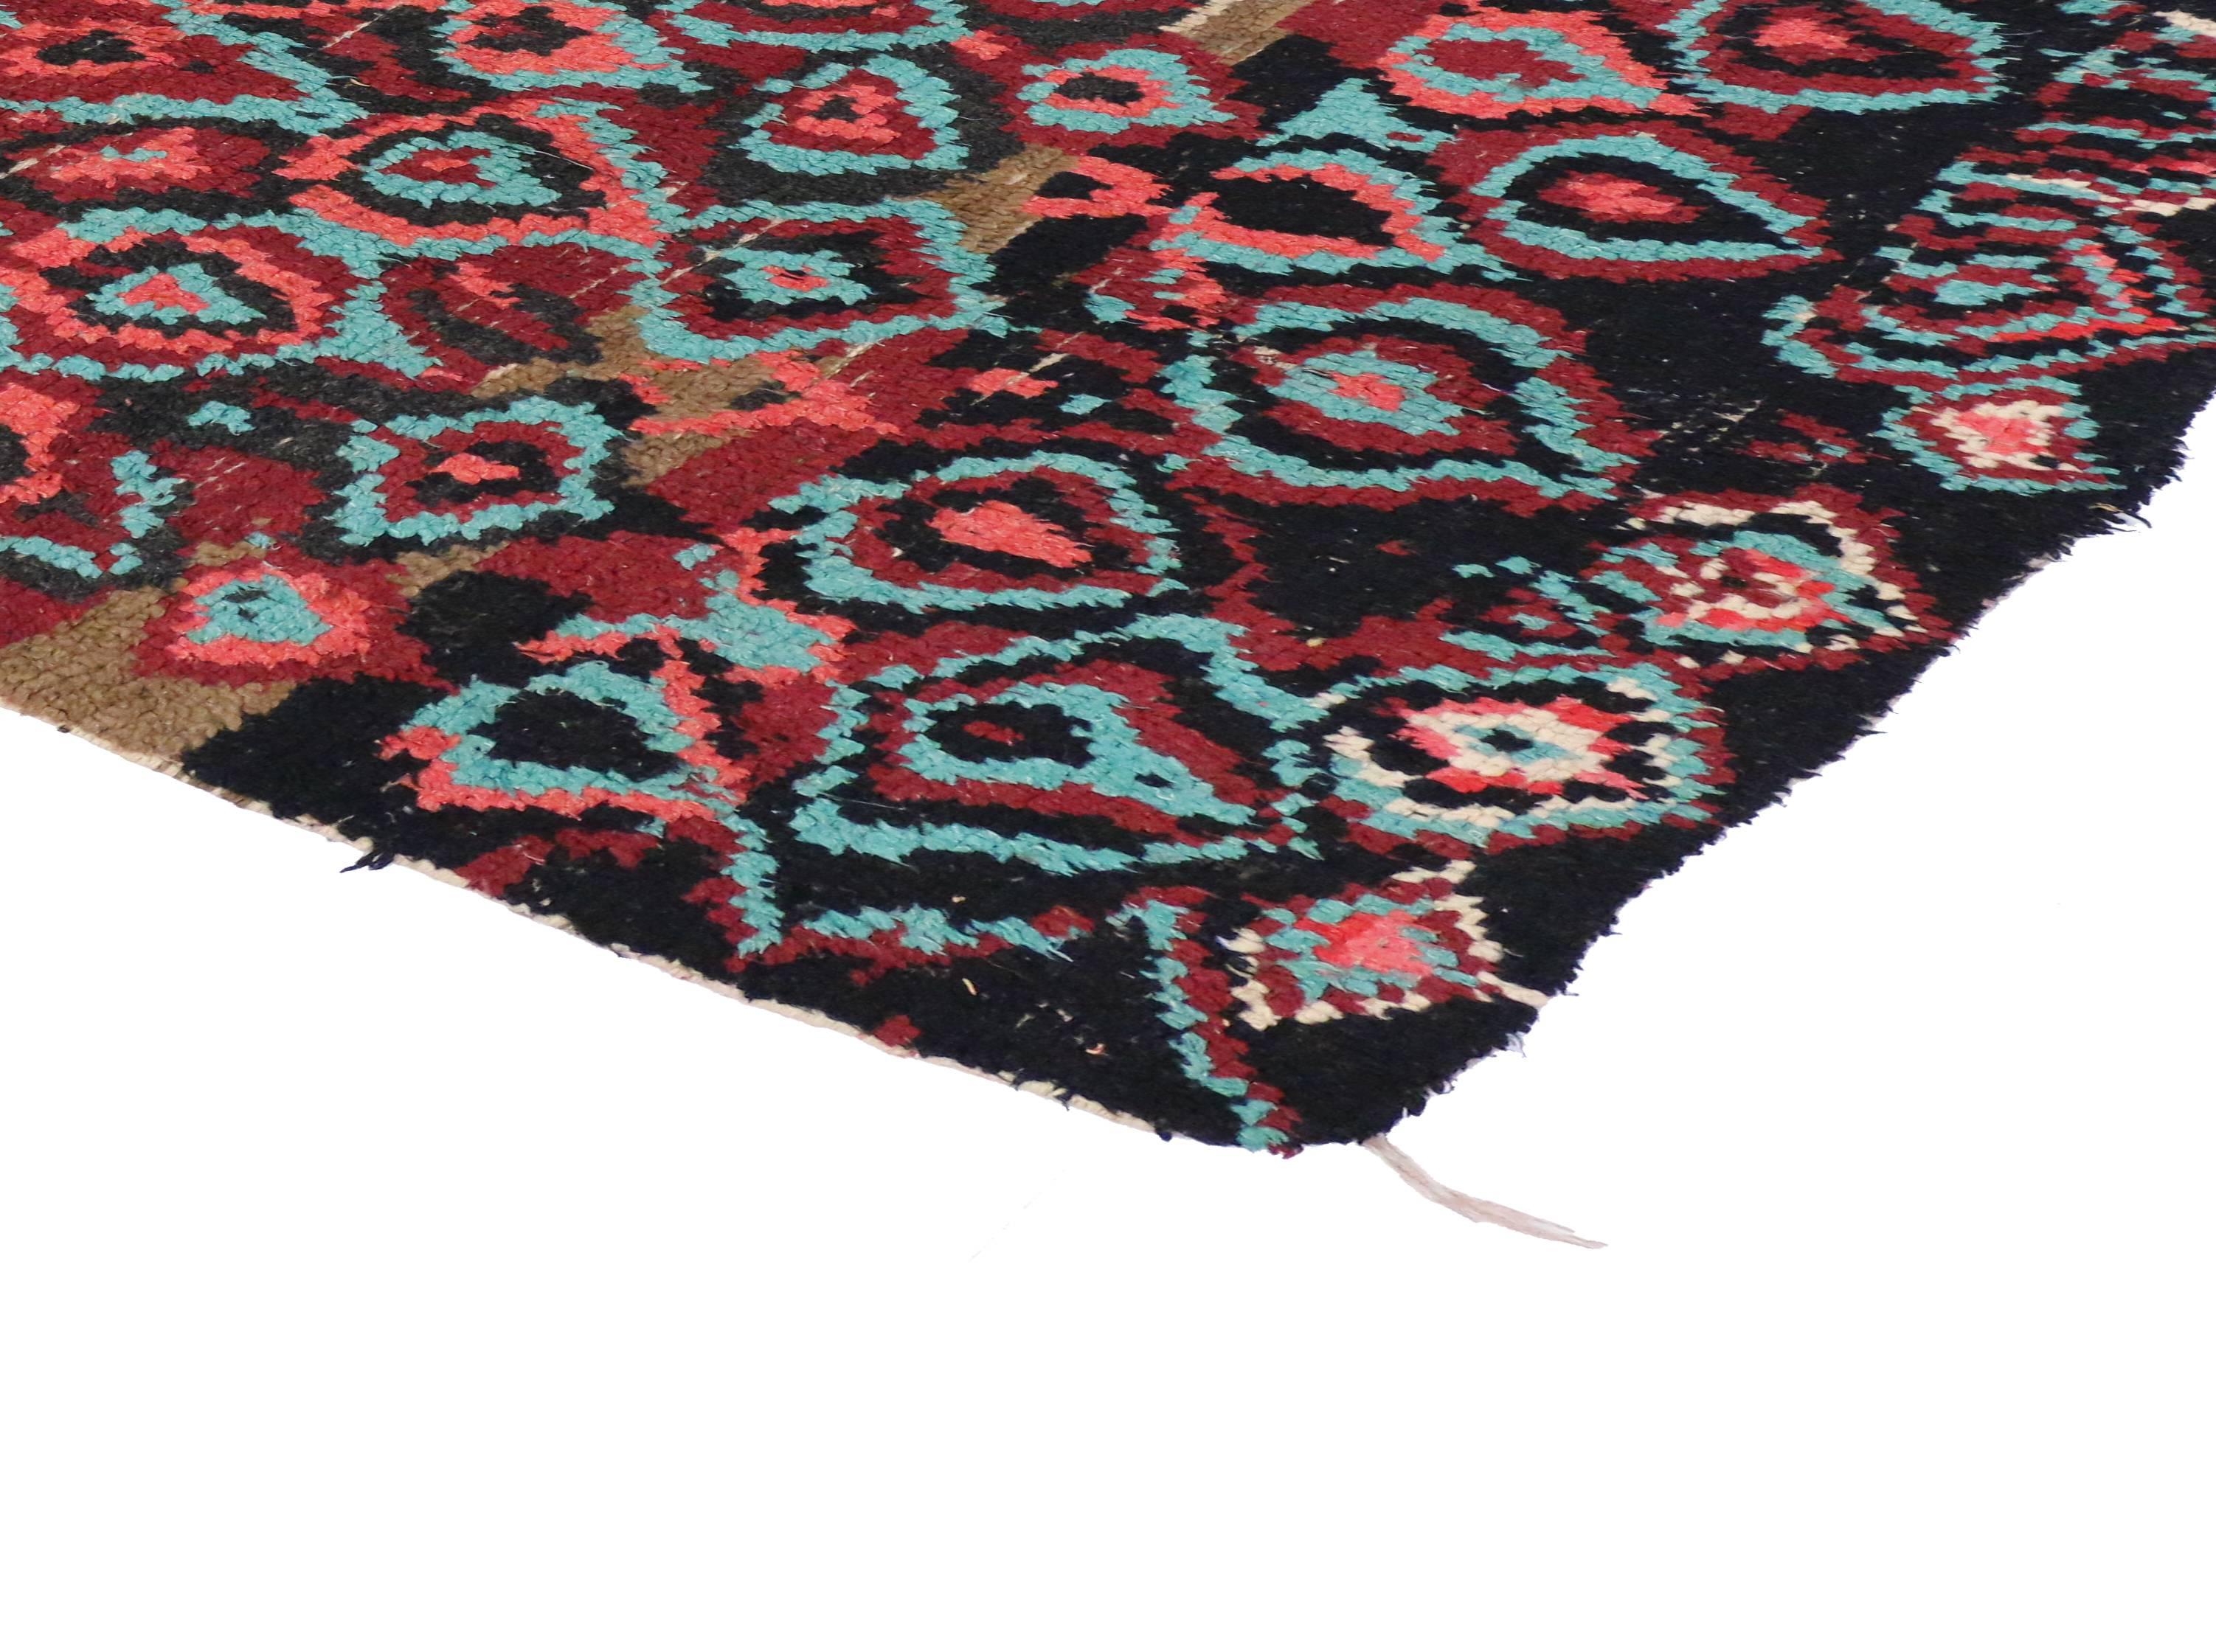 ​​20097 Vintage Berber Moroccan Rug with Post-Modern Memphis Style 04'02 x 07'08. ​Showcasing a bold expressive design, incredible detail and texture, this hand knotted wool contemporary Berber Moroccan rug is a captivating vision of woven beauty.